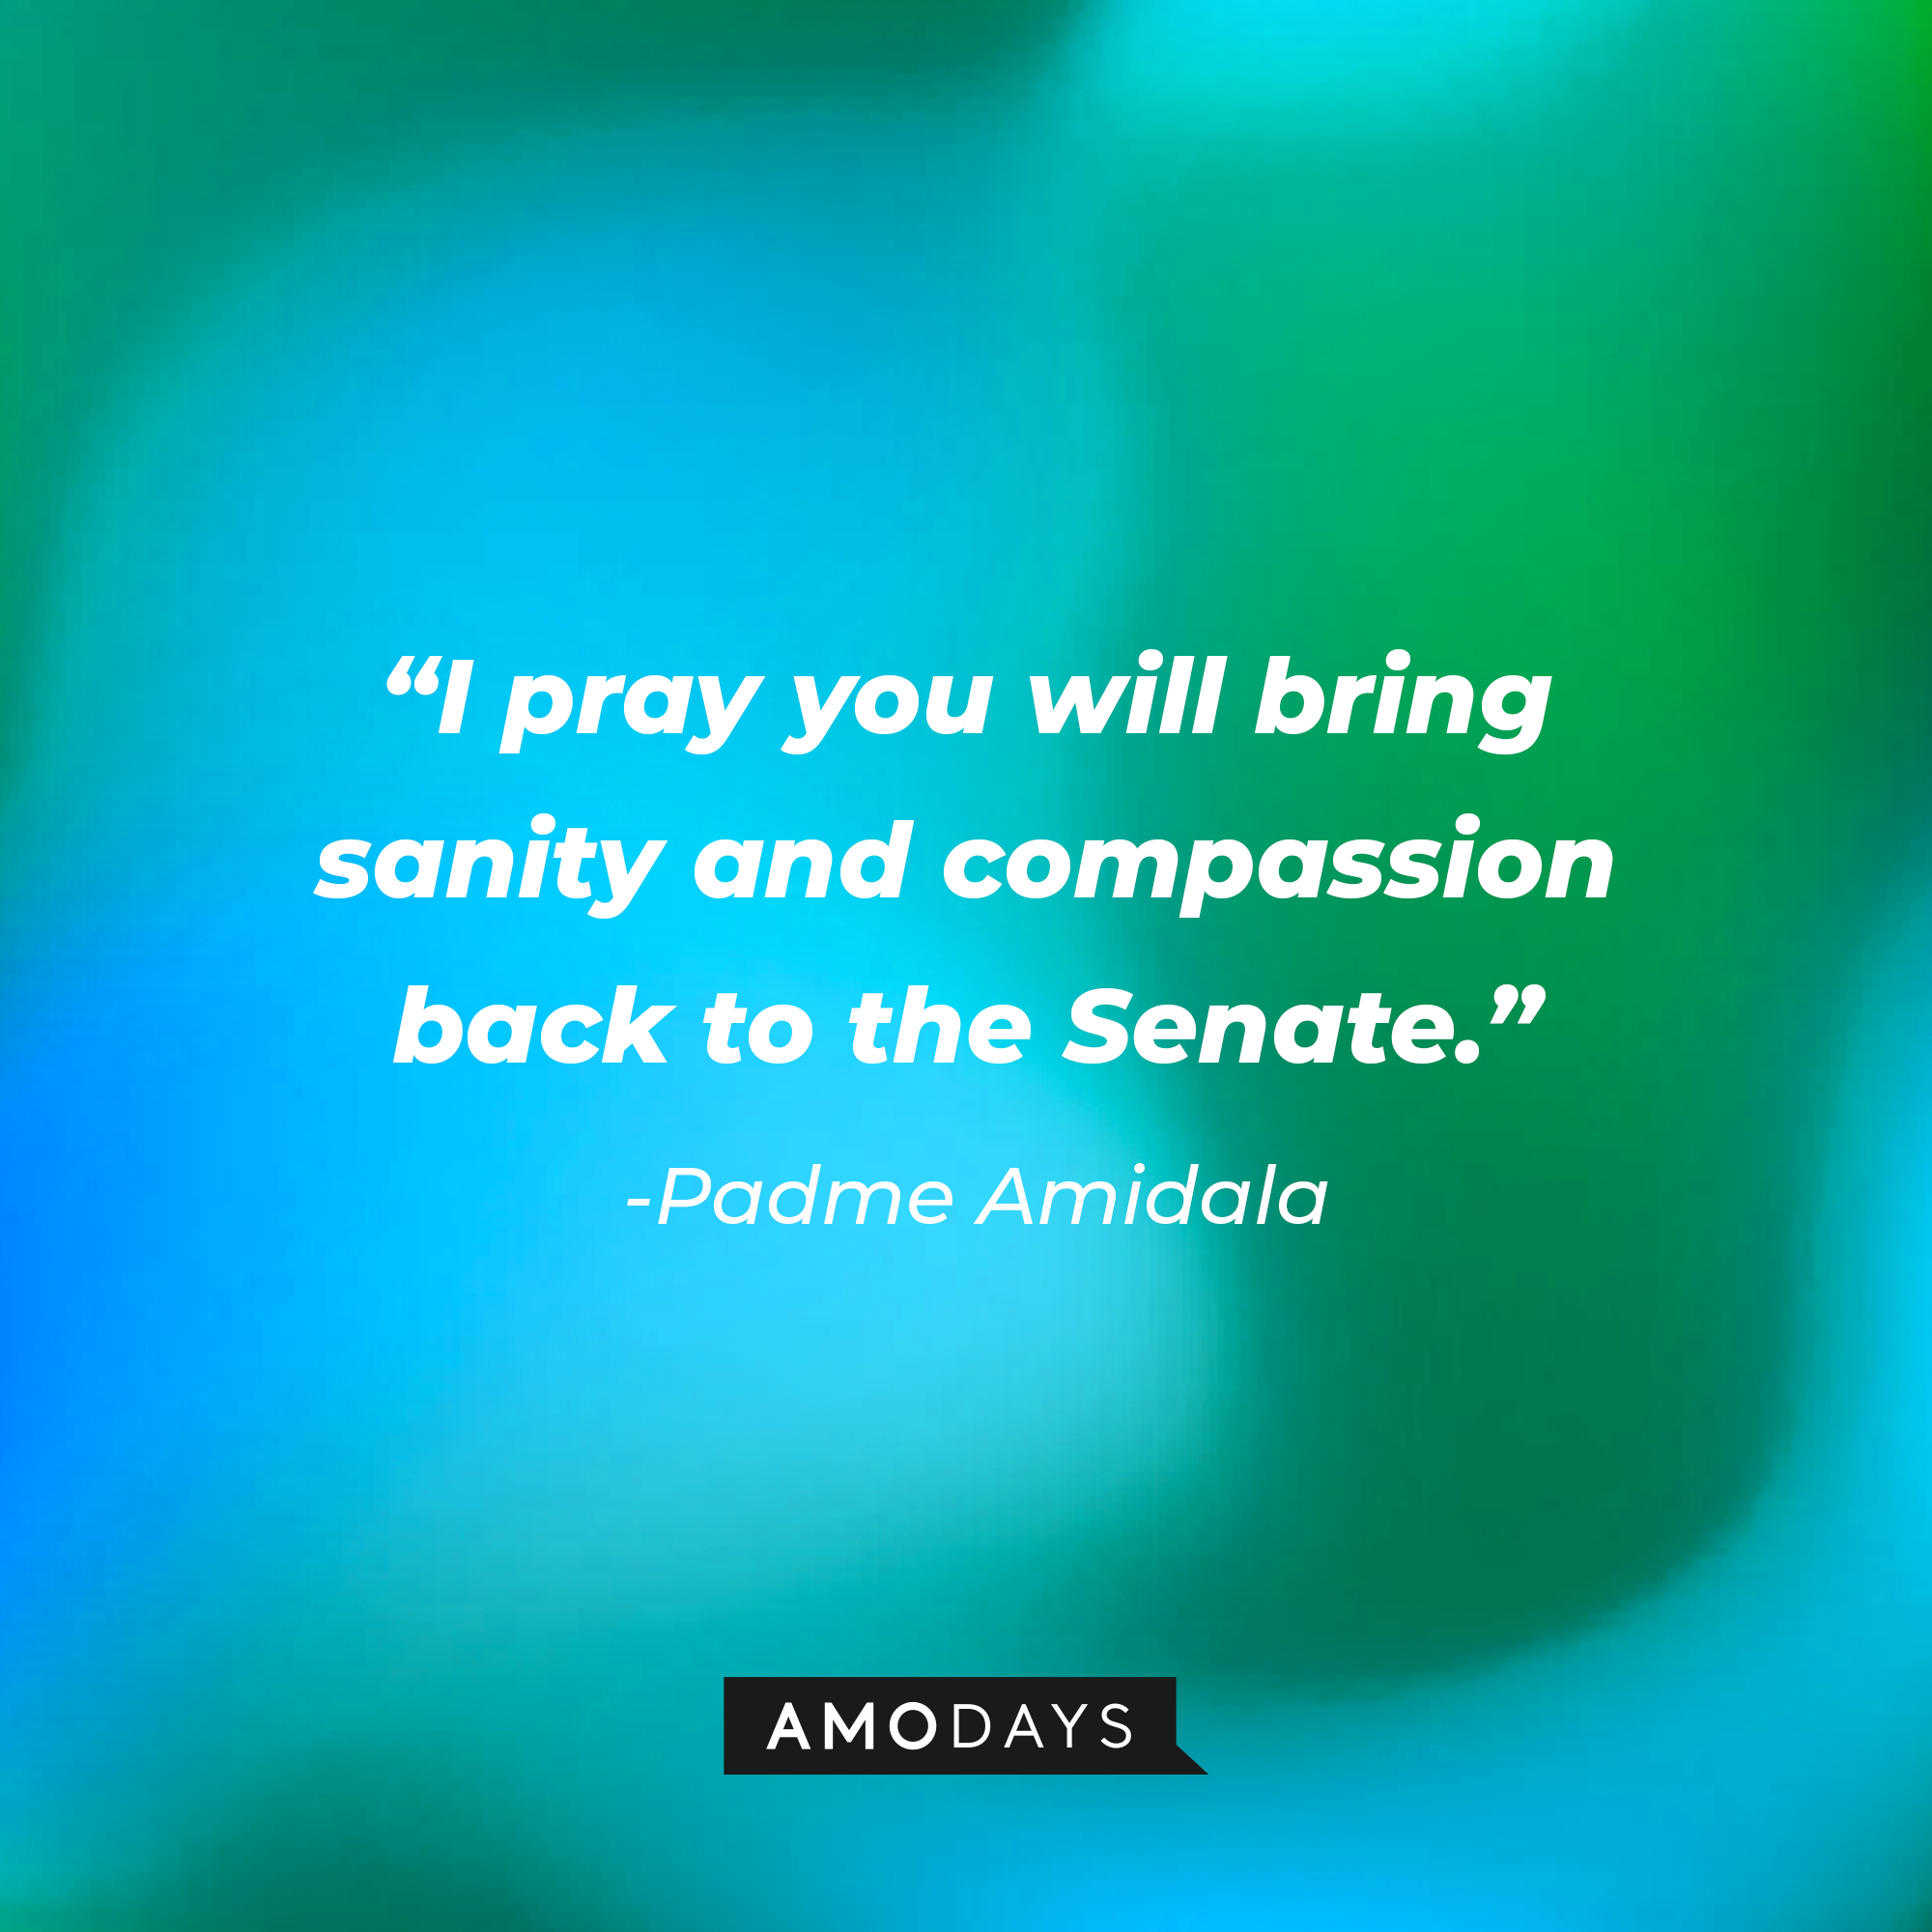 Padme Amidala's quote: "I pray you will bring sanity and compassion back to the Senate." | Source: AmoDays